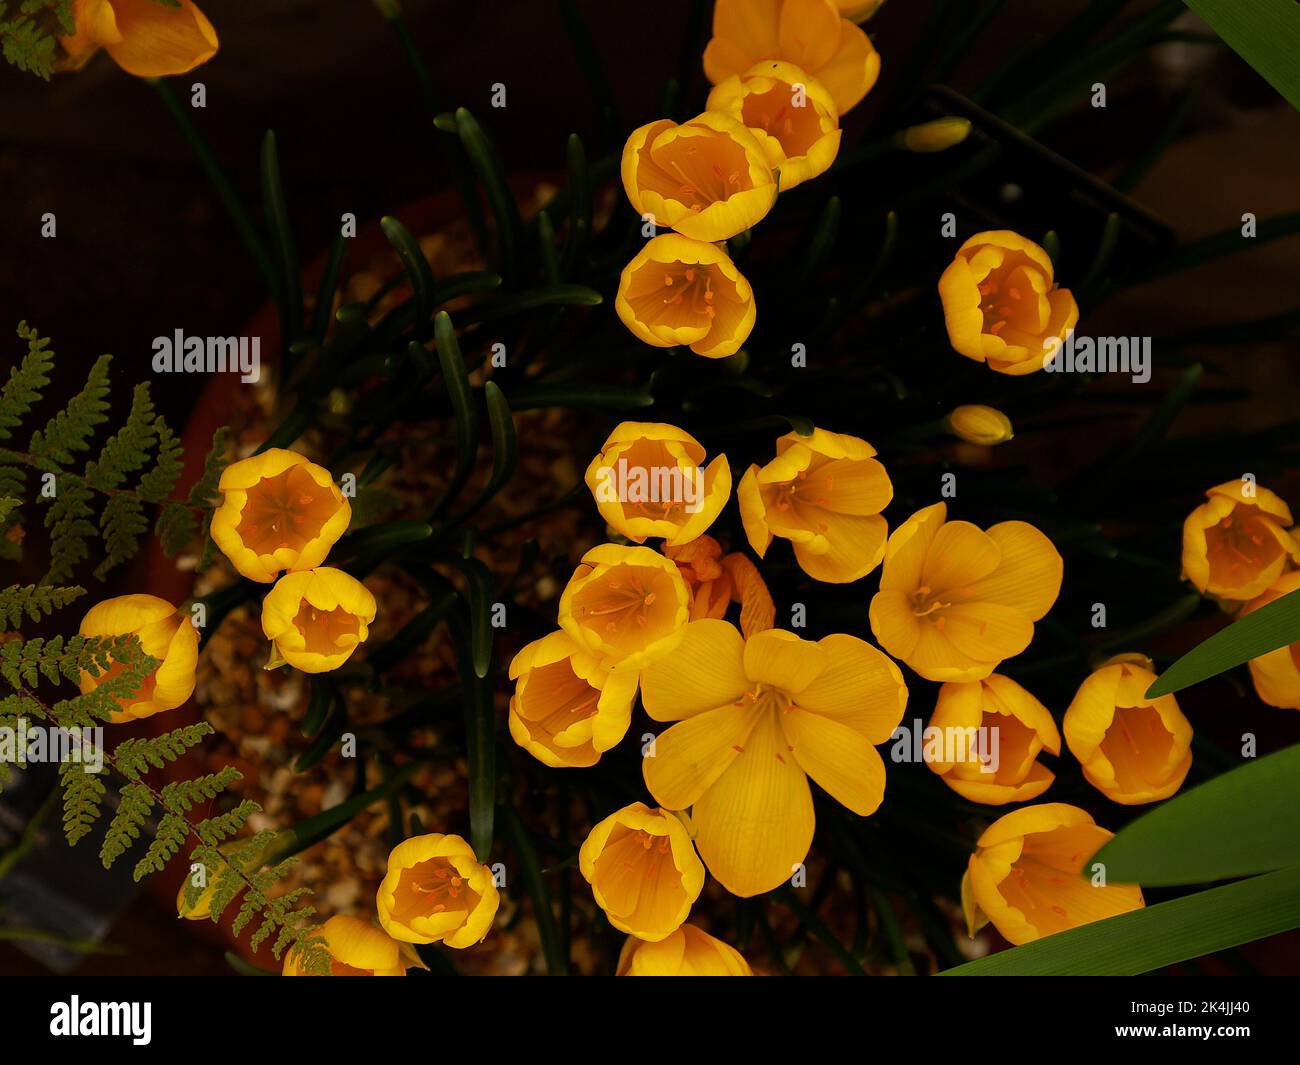 Close up of the yellow autumn flowering bulbous garden plant Sternbergia lutea seen in the garden in the UK. Stock Photo